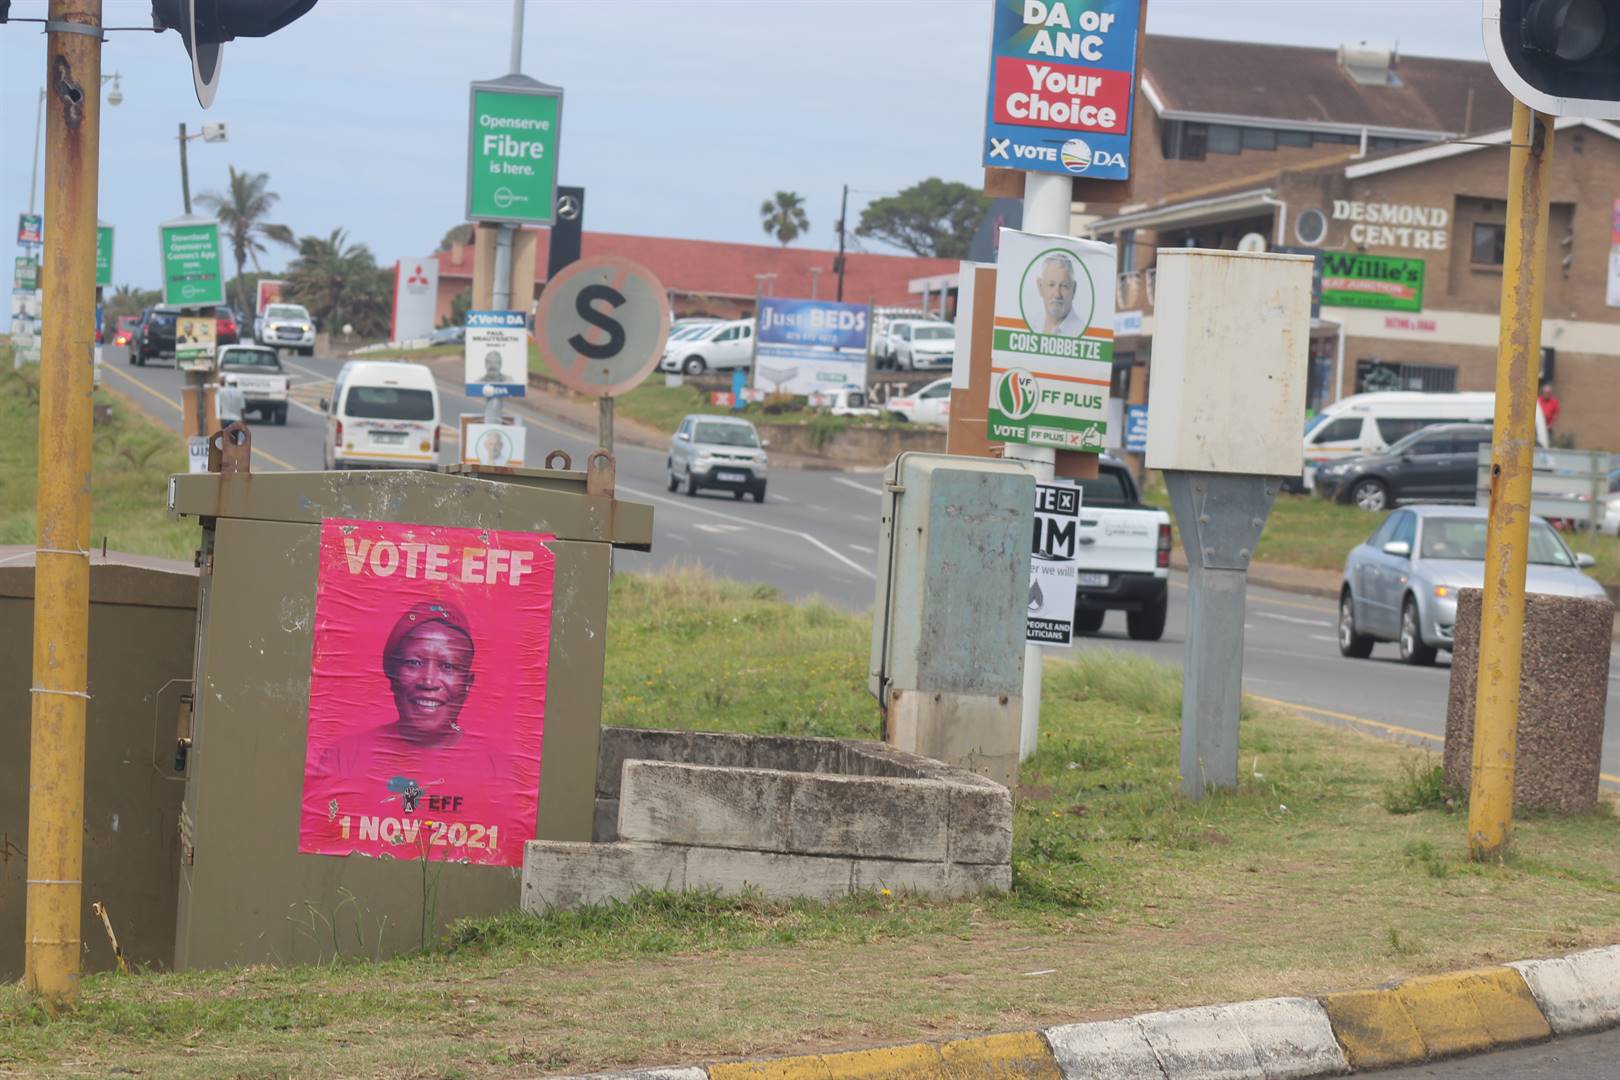 Residents have raised concerns over the EFF’s election posters glued to electricty boxes on the KZN South Coast.